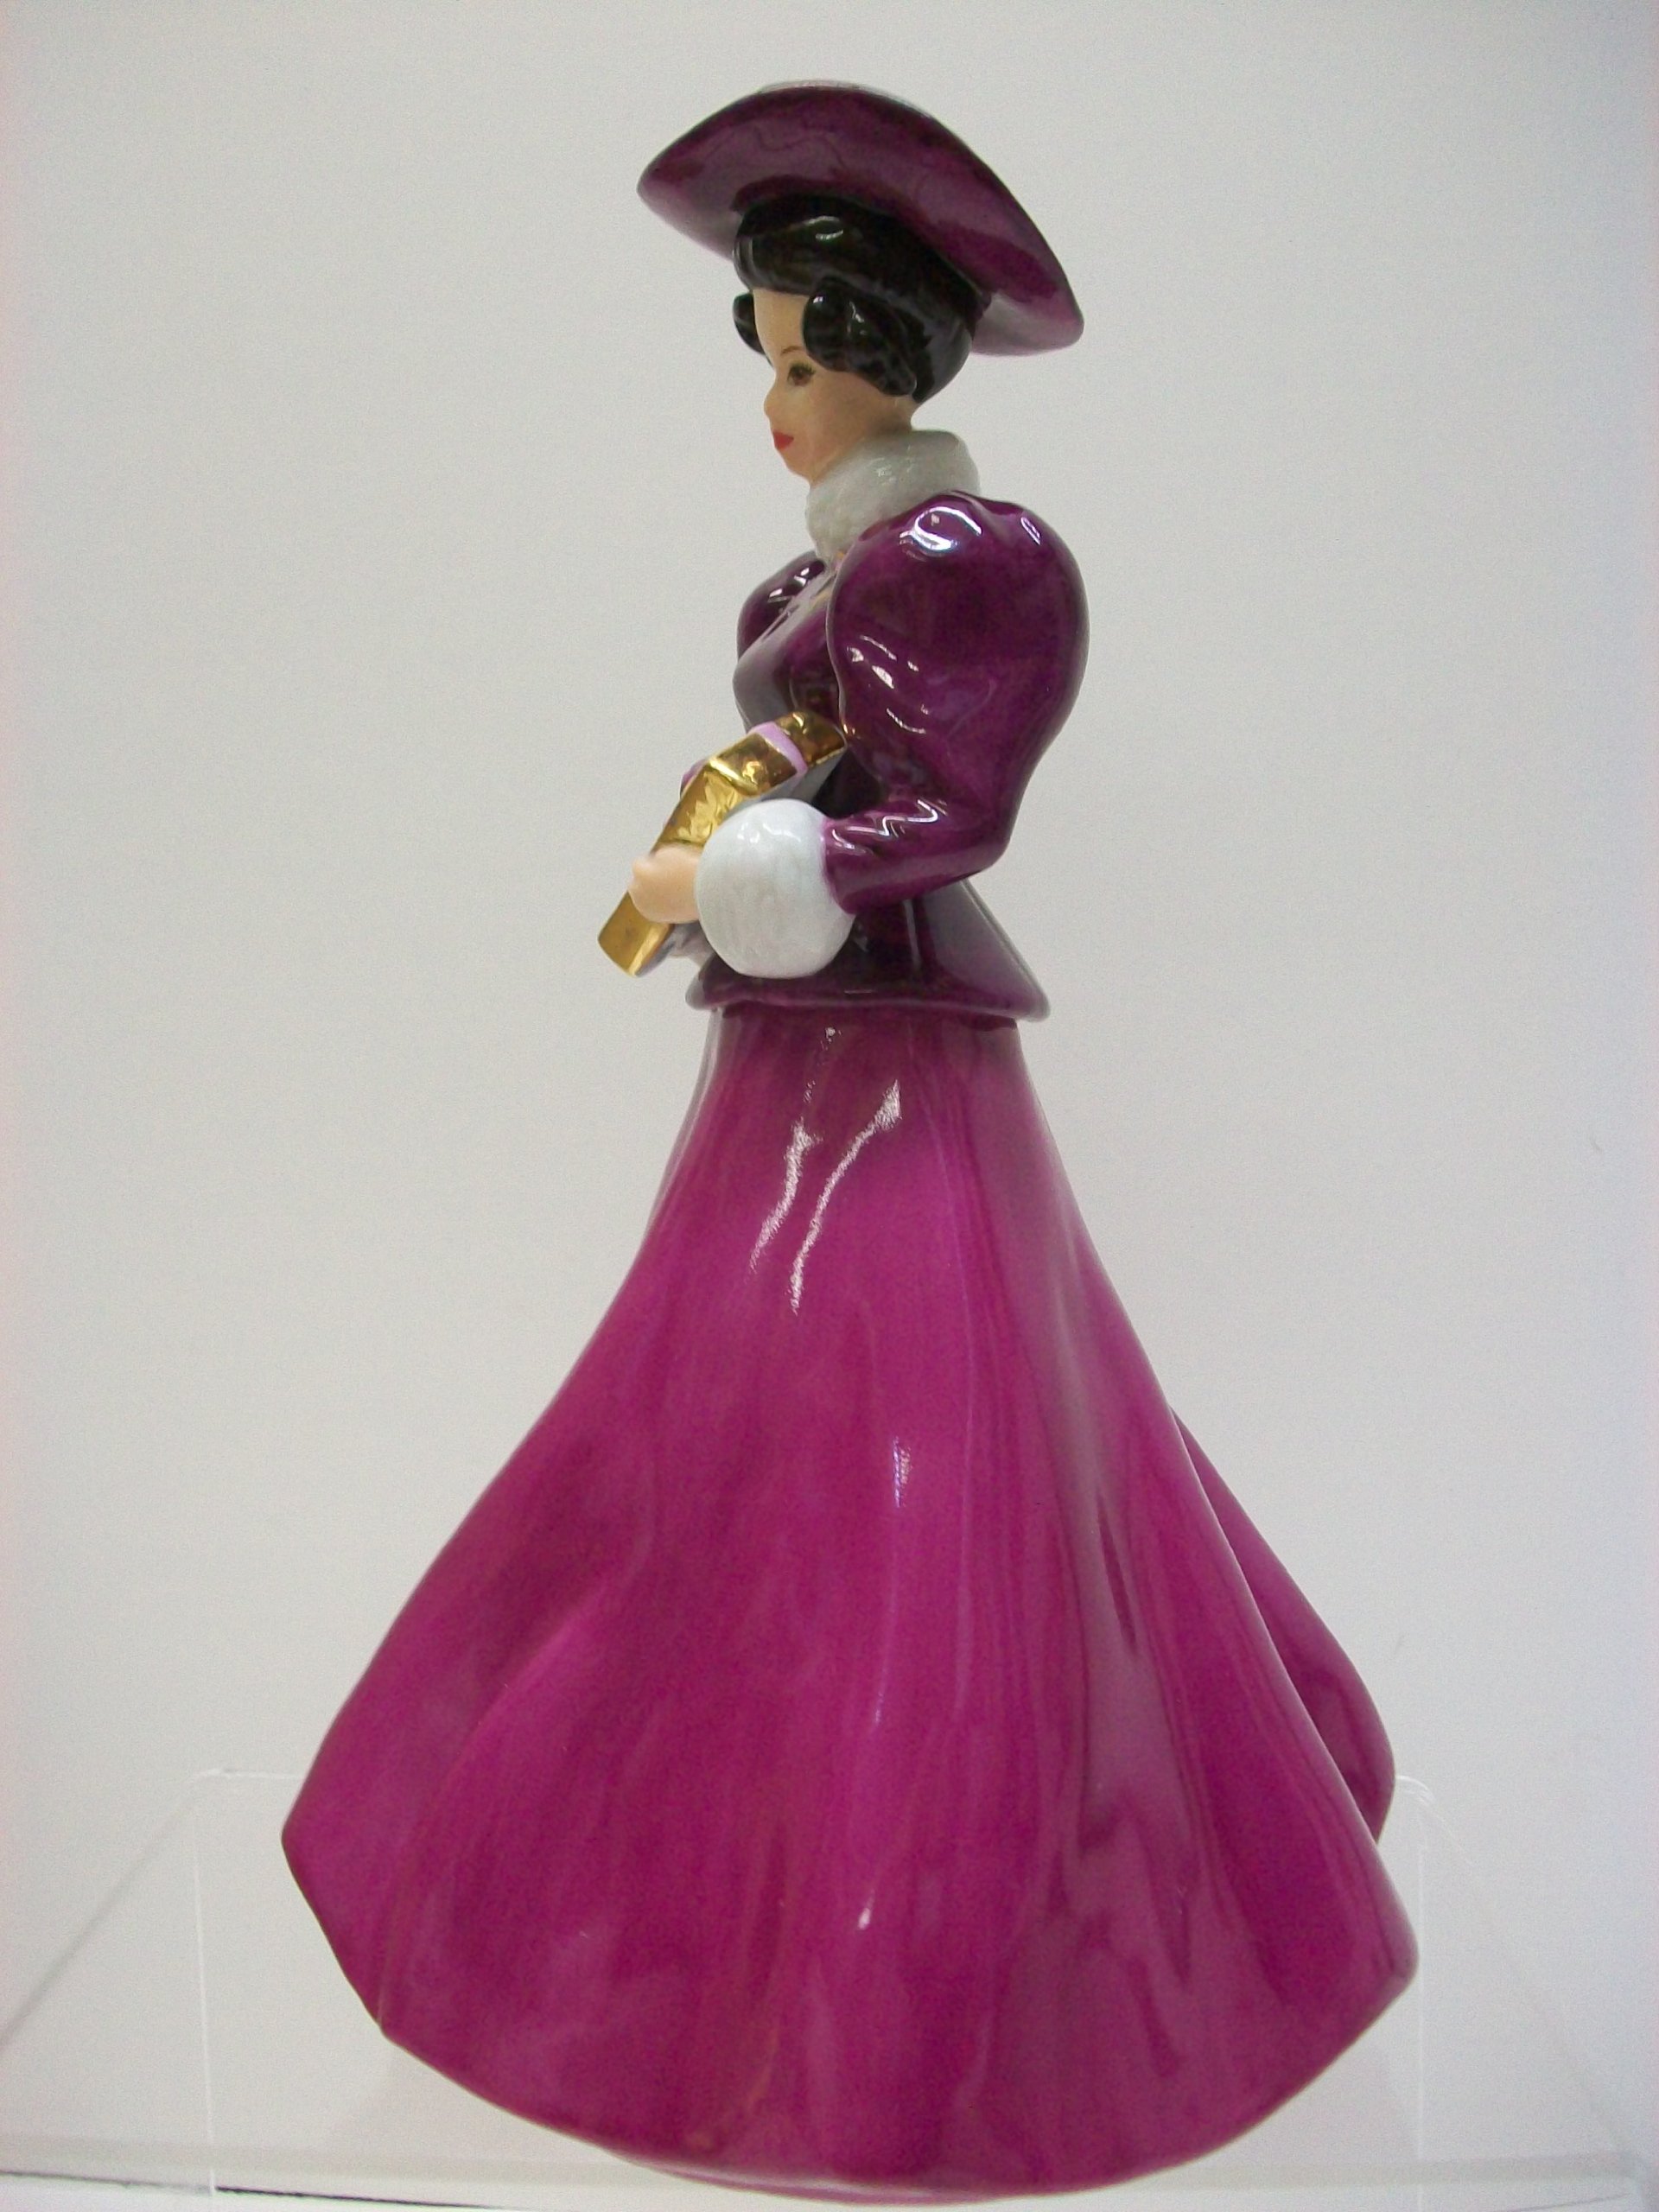 Barbie Holiday Traditions Limited Edition Porcelain Figurine